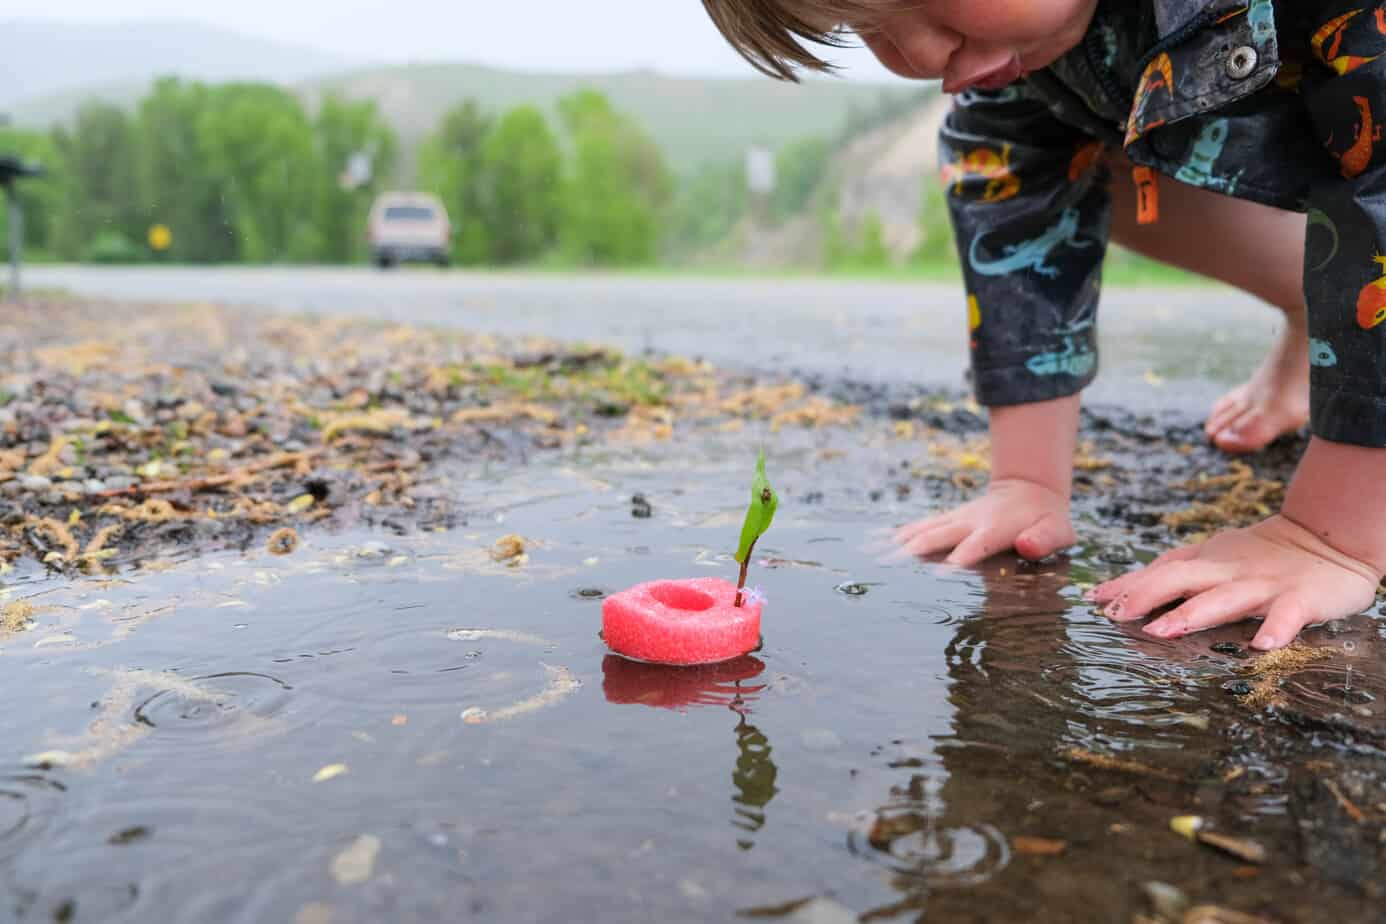 Outdoor Rainy Day Activity Ideas for Kids - Thimble and Twig